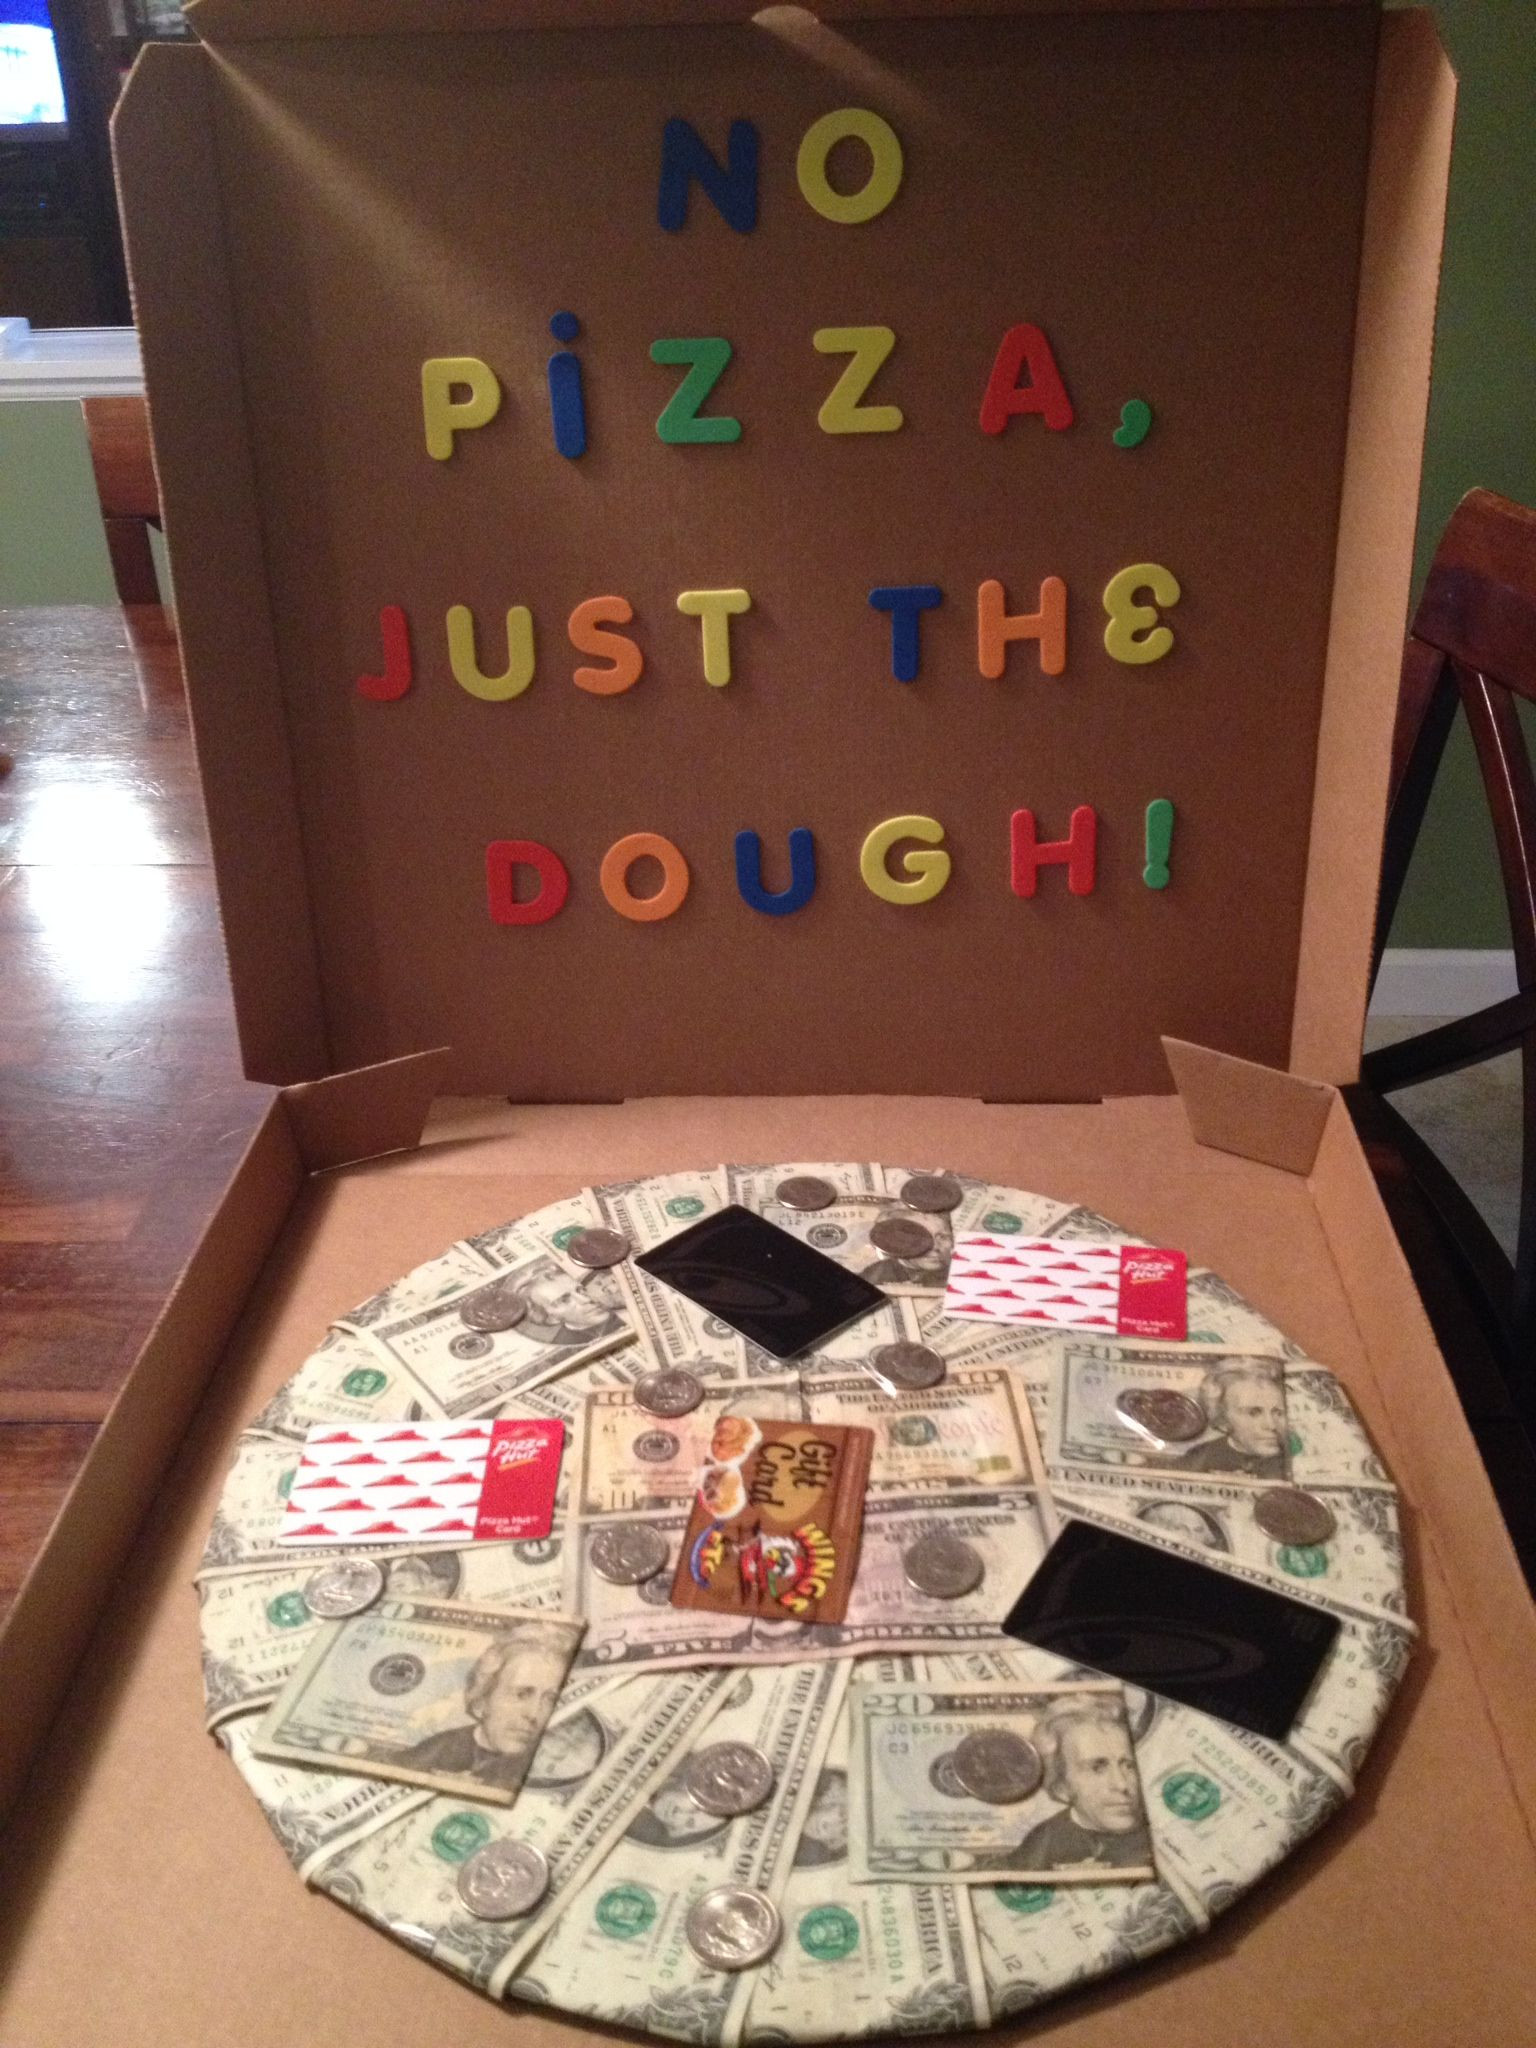 18Th Birthday Gift Ideas For Son
 No pizza just the dough Made this for my son s 19th